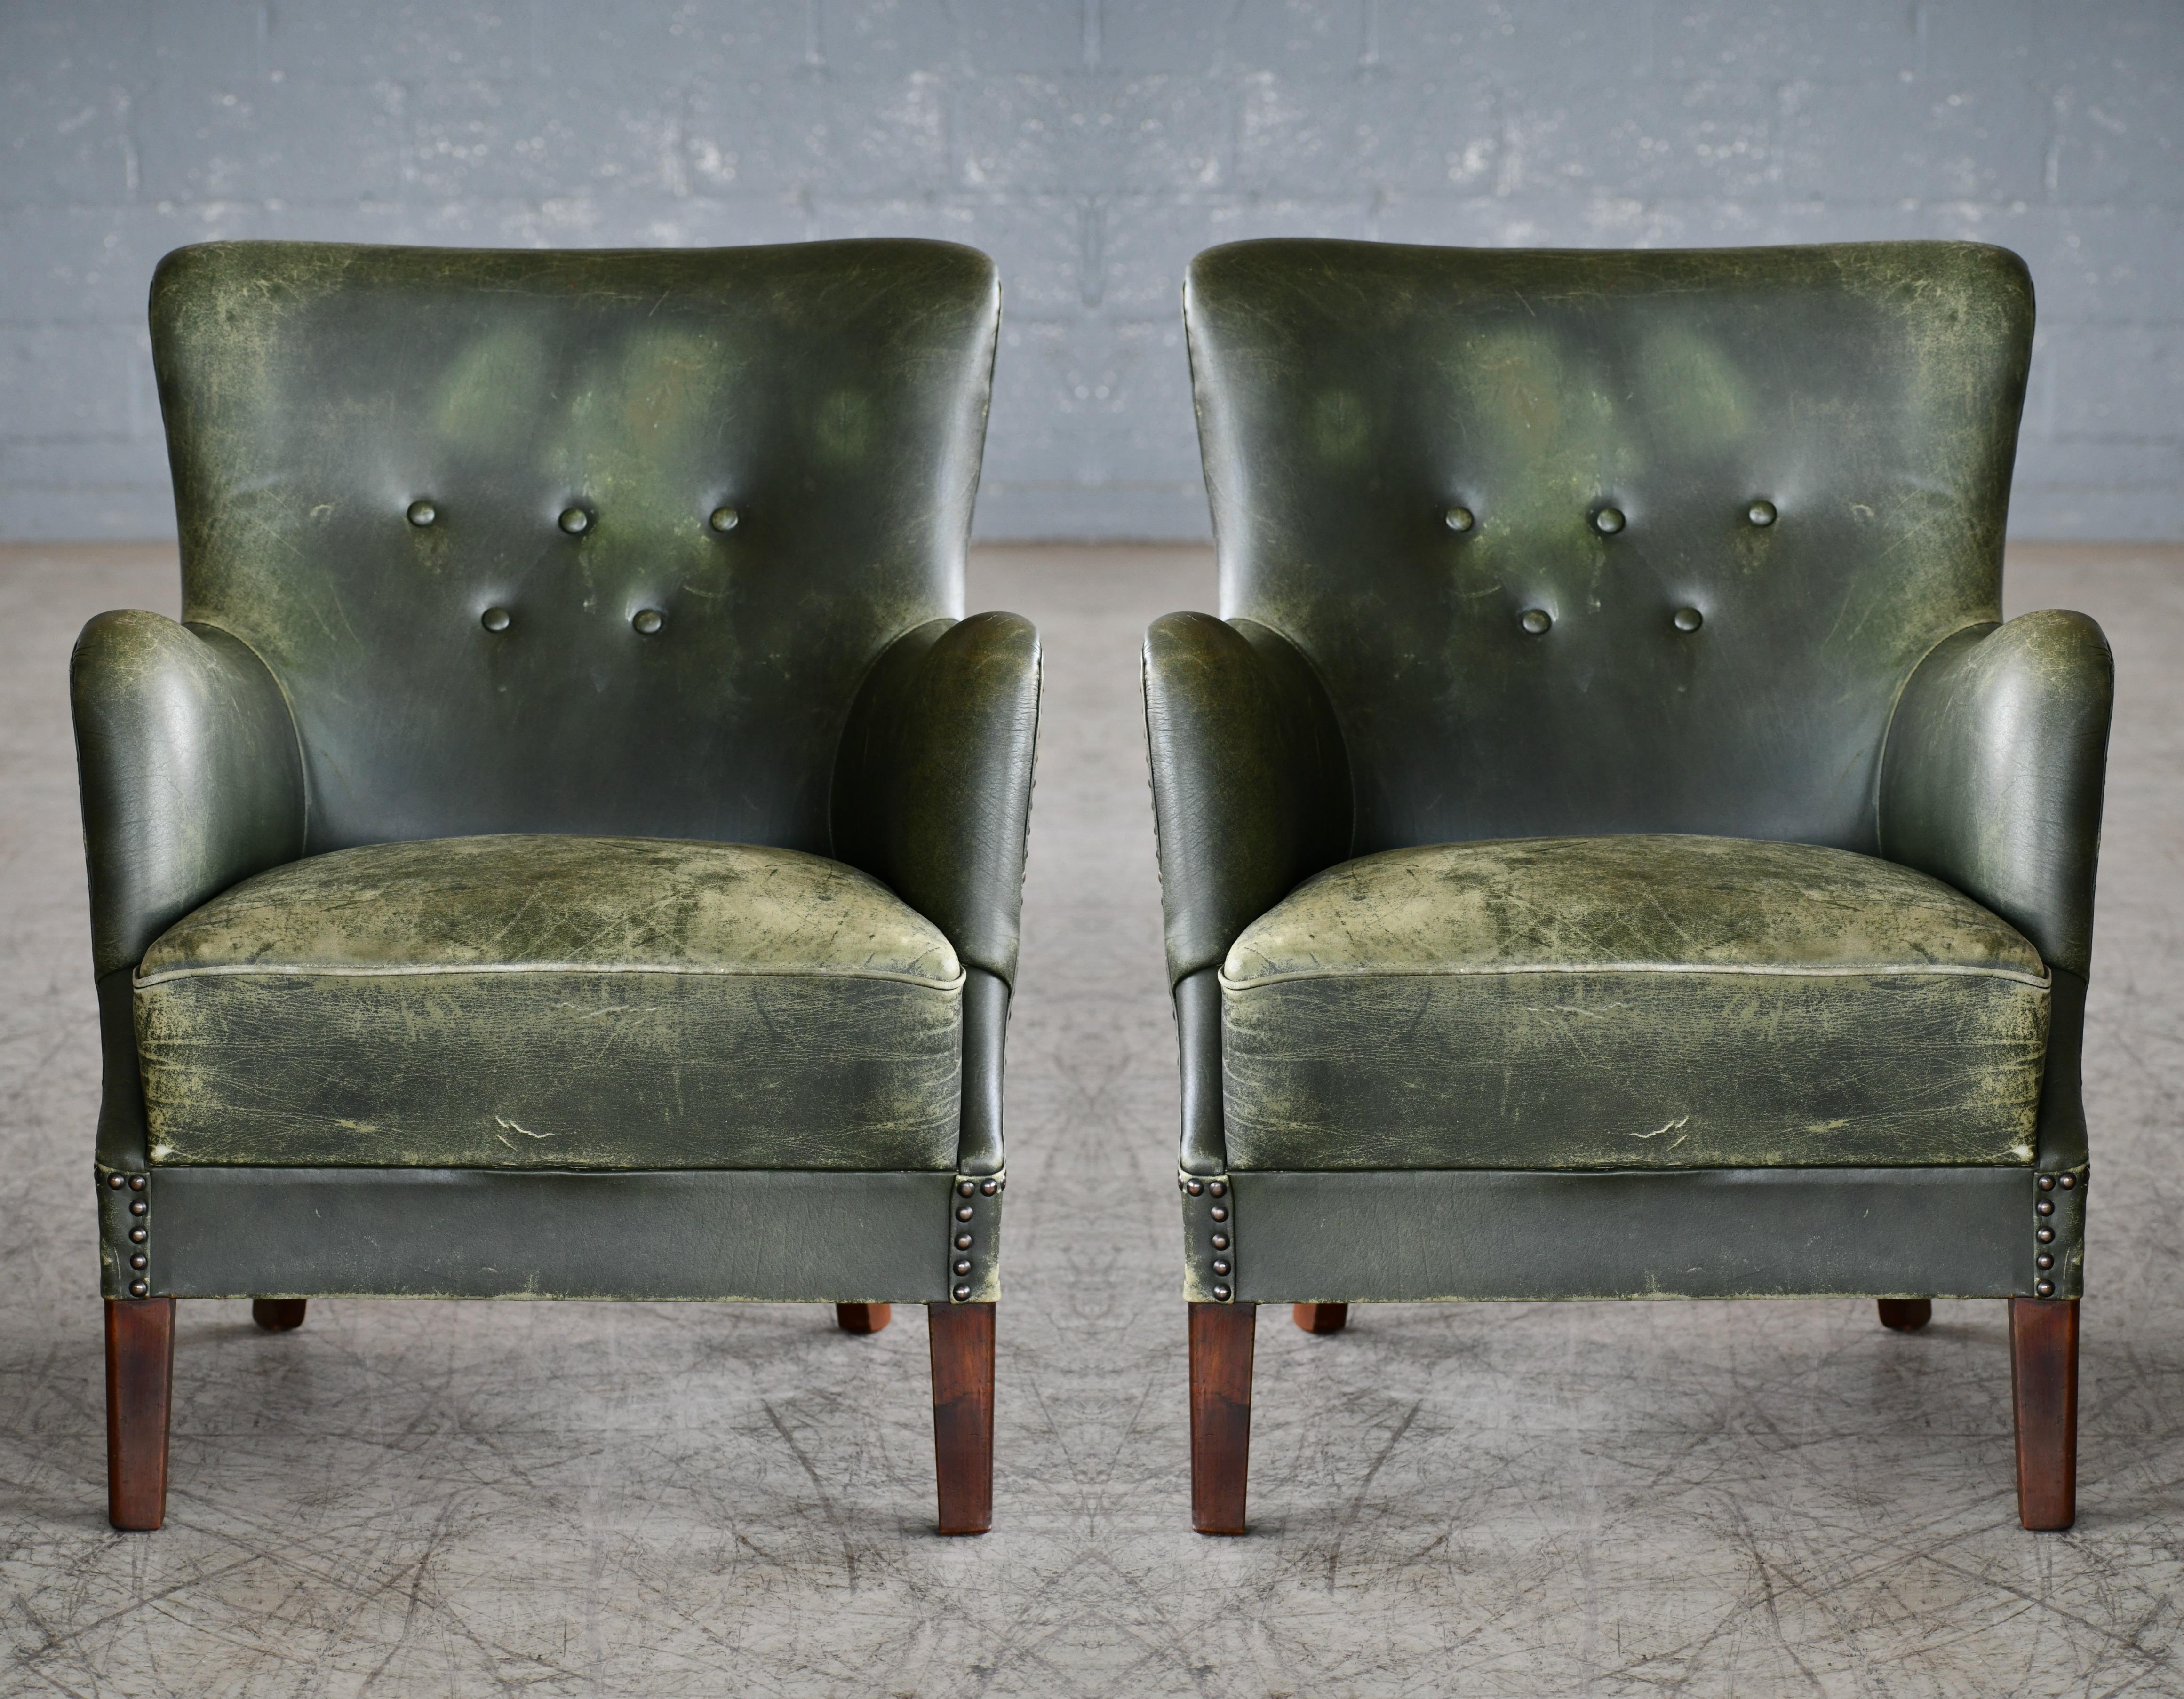 Scandinavian Modern Pair of Danish 1950s Peter Hvidt Attributed Lounge Chairs Green Leather